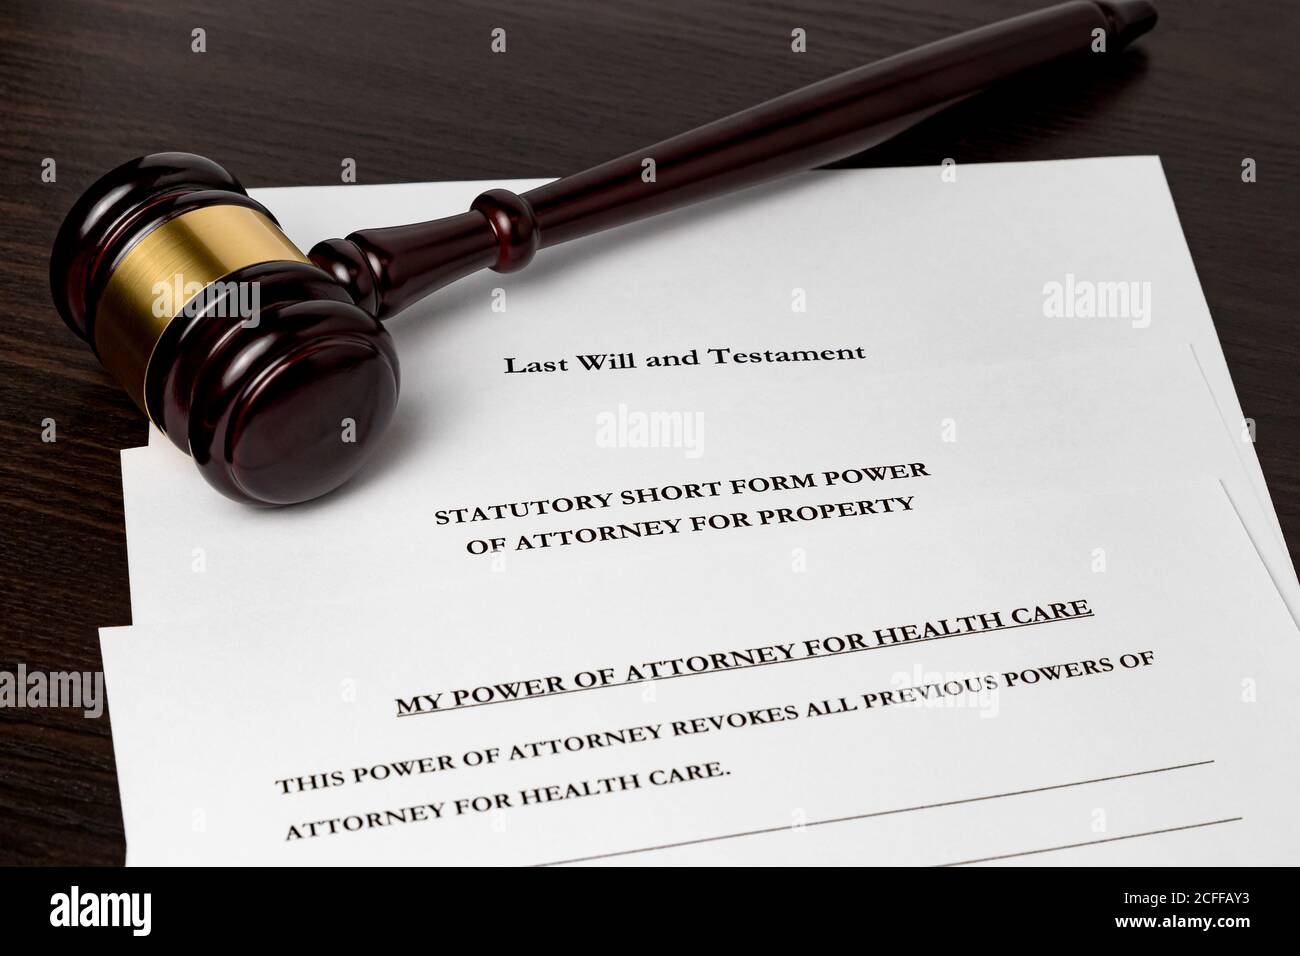 Last will and testament, Power of Attorney, and health care power of attorney forms with gavel. Concept of planning for death and estate planning Stock Photo